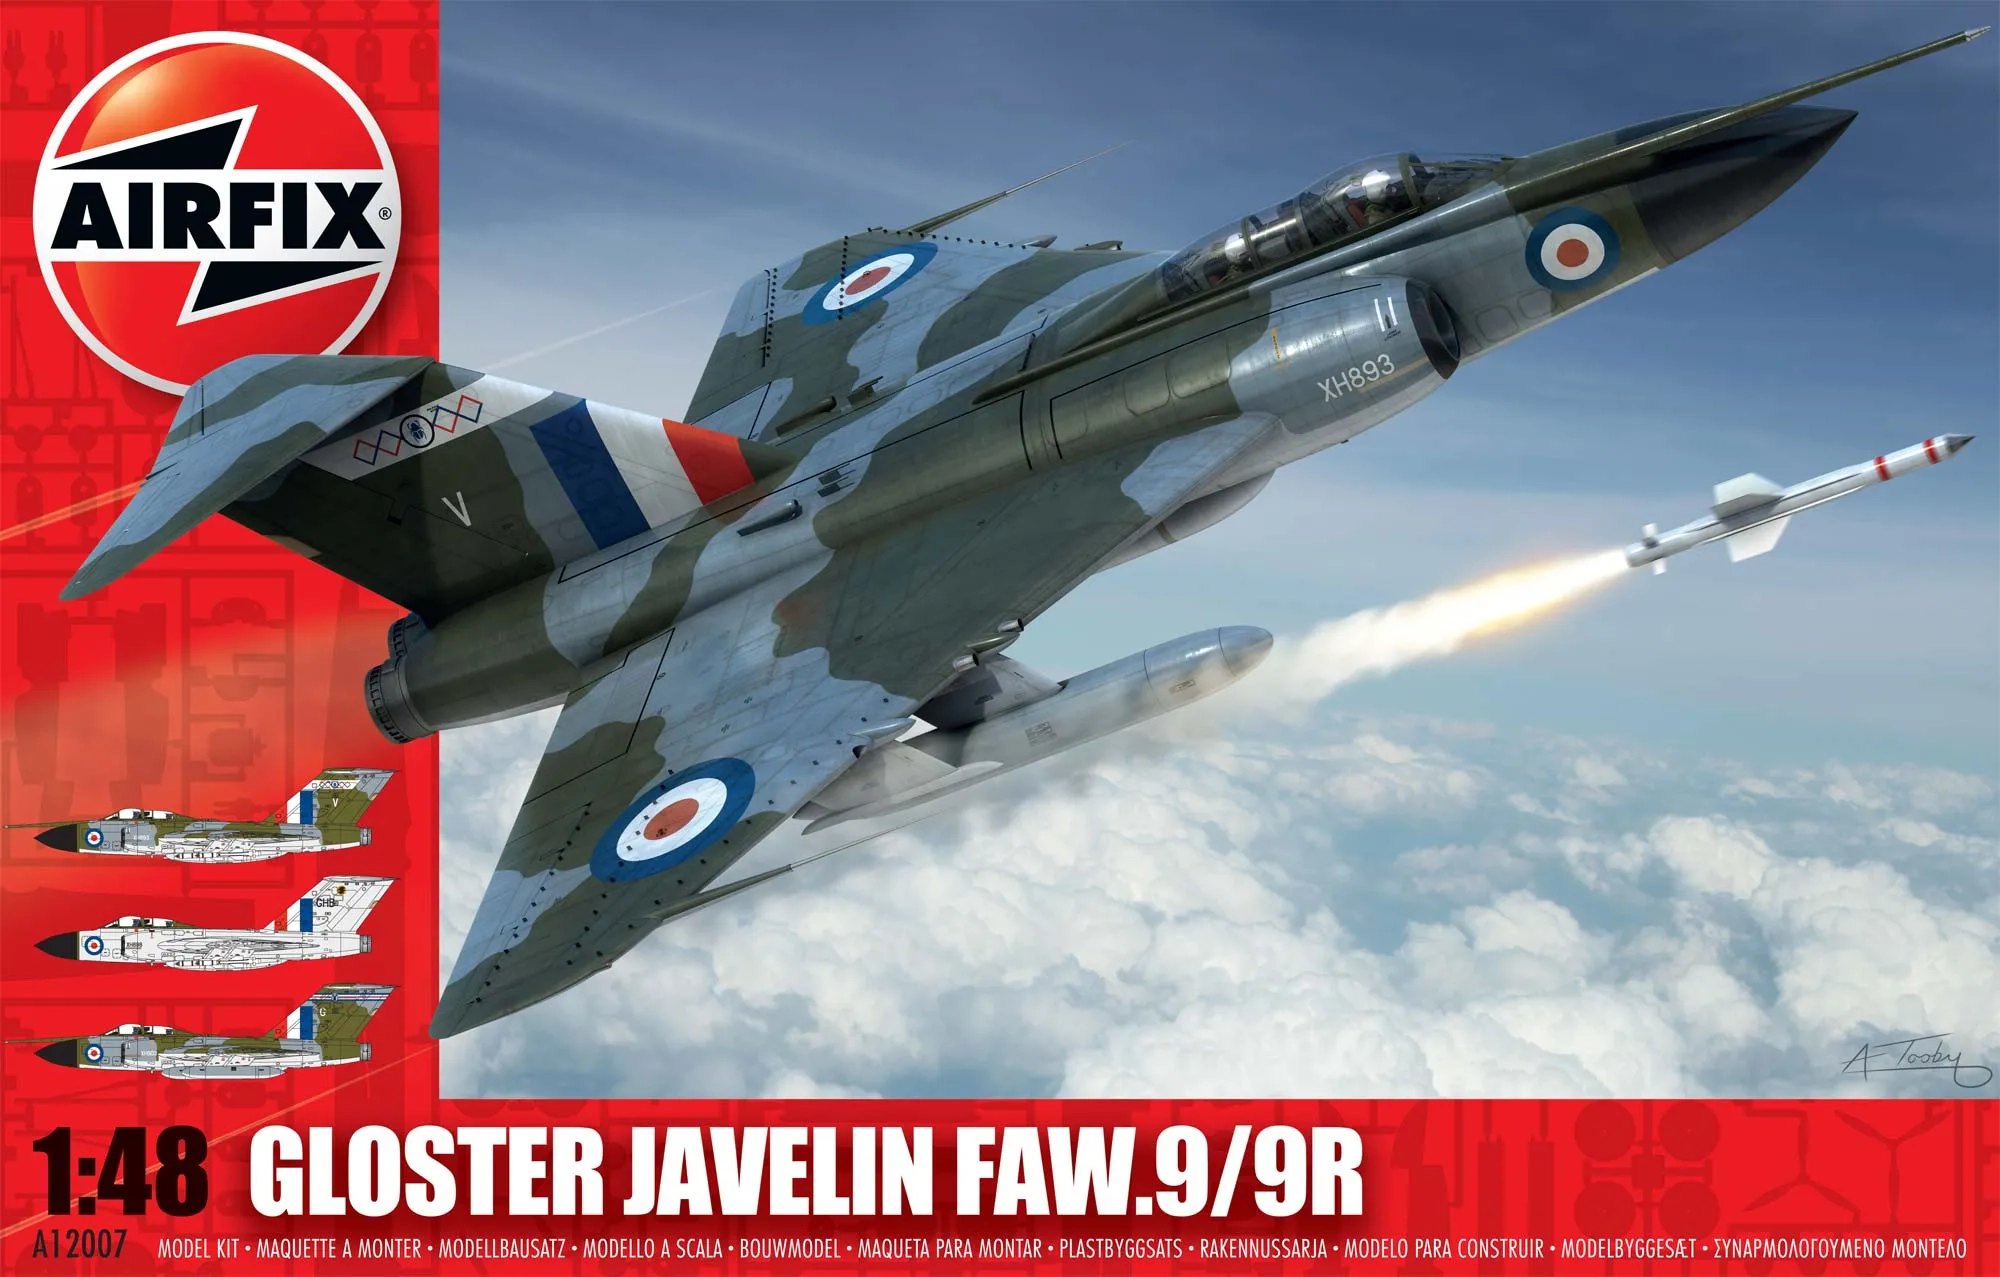 Gloster Javelin FAW.9/9R